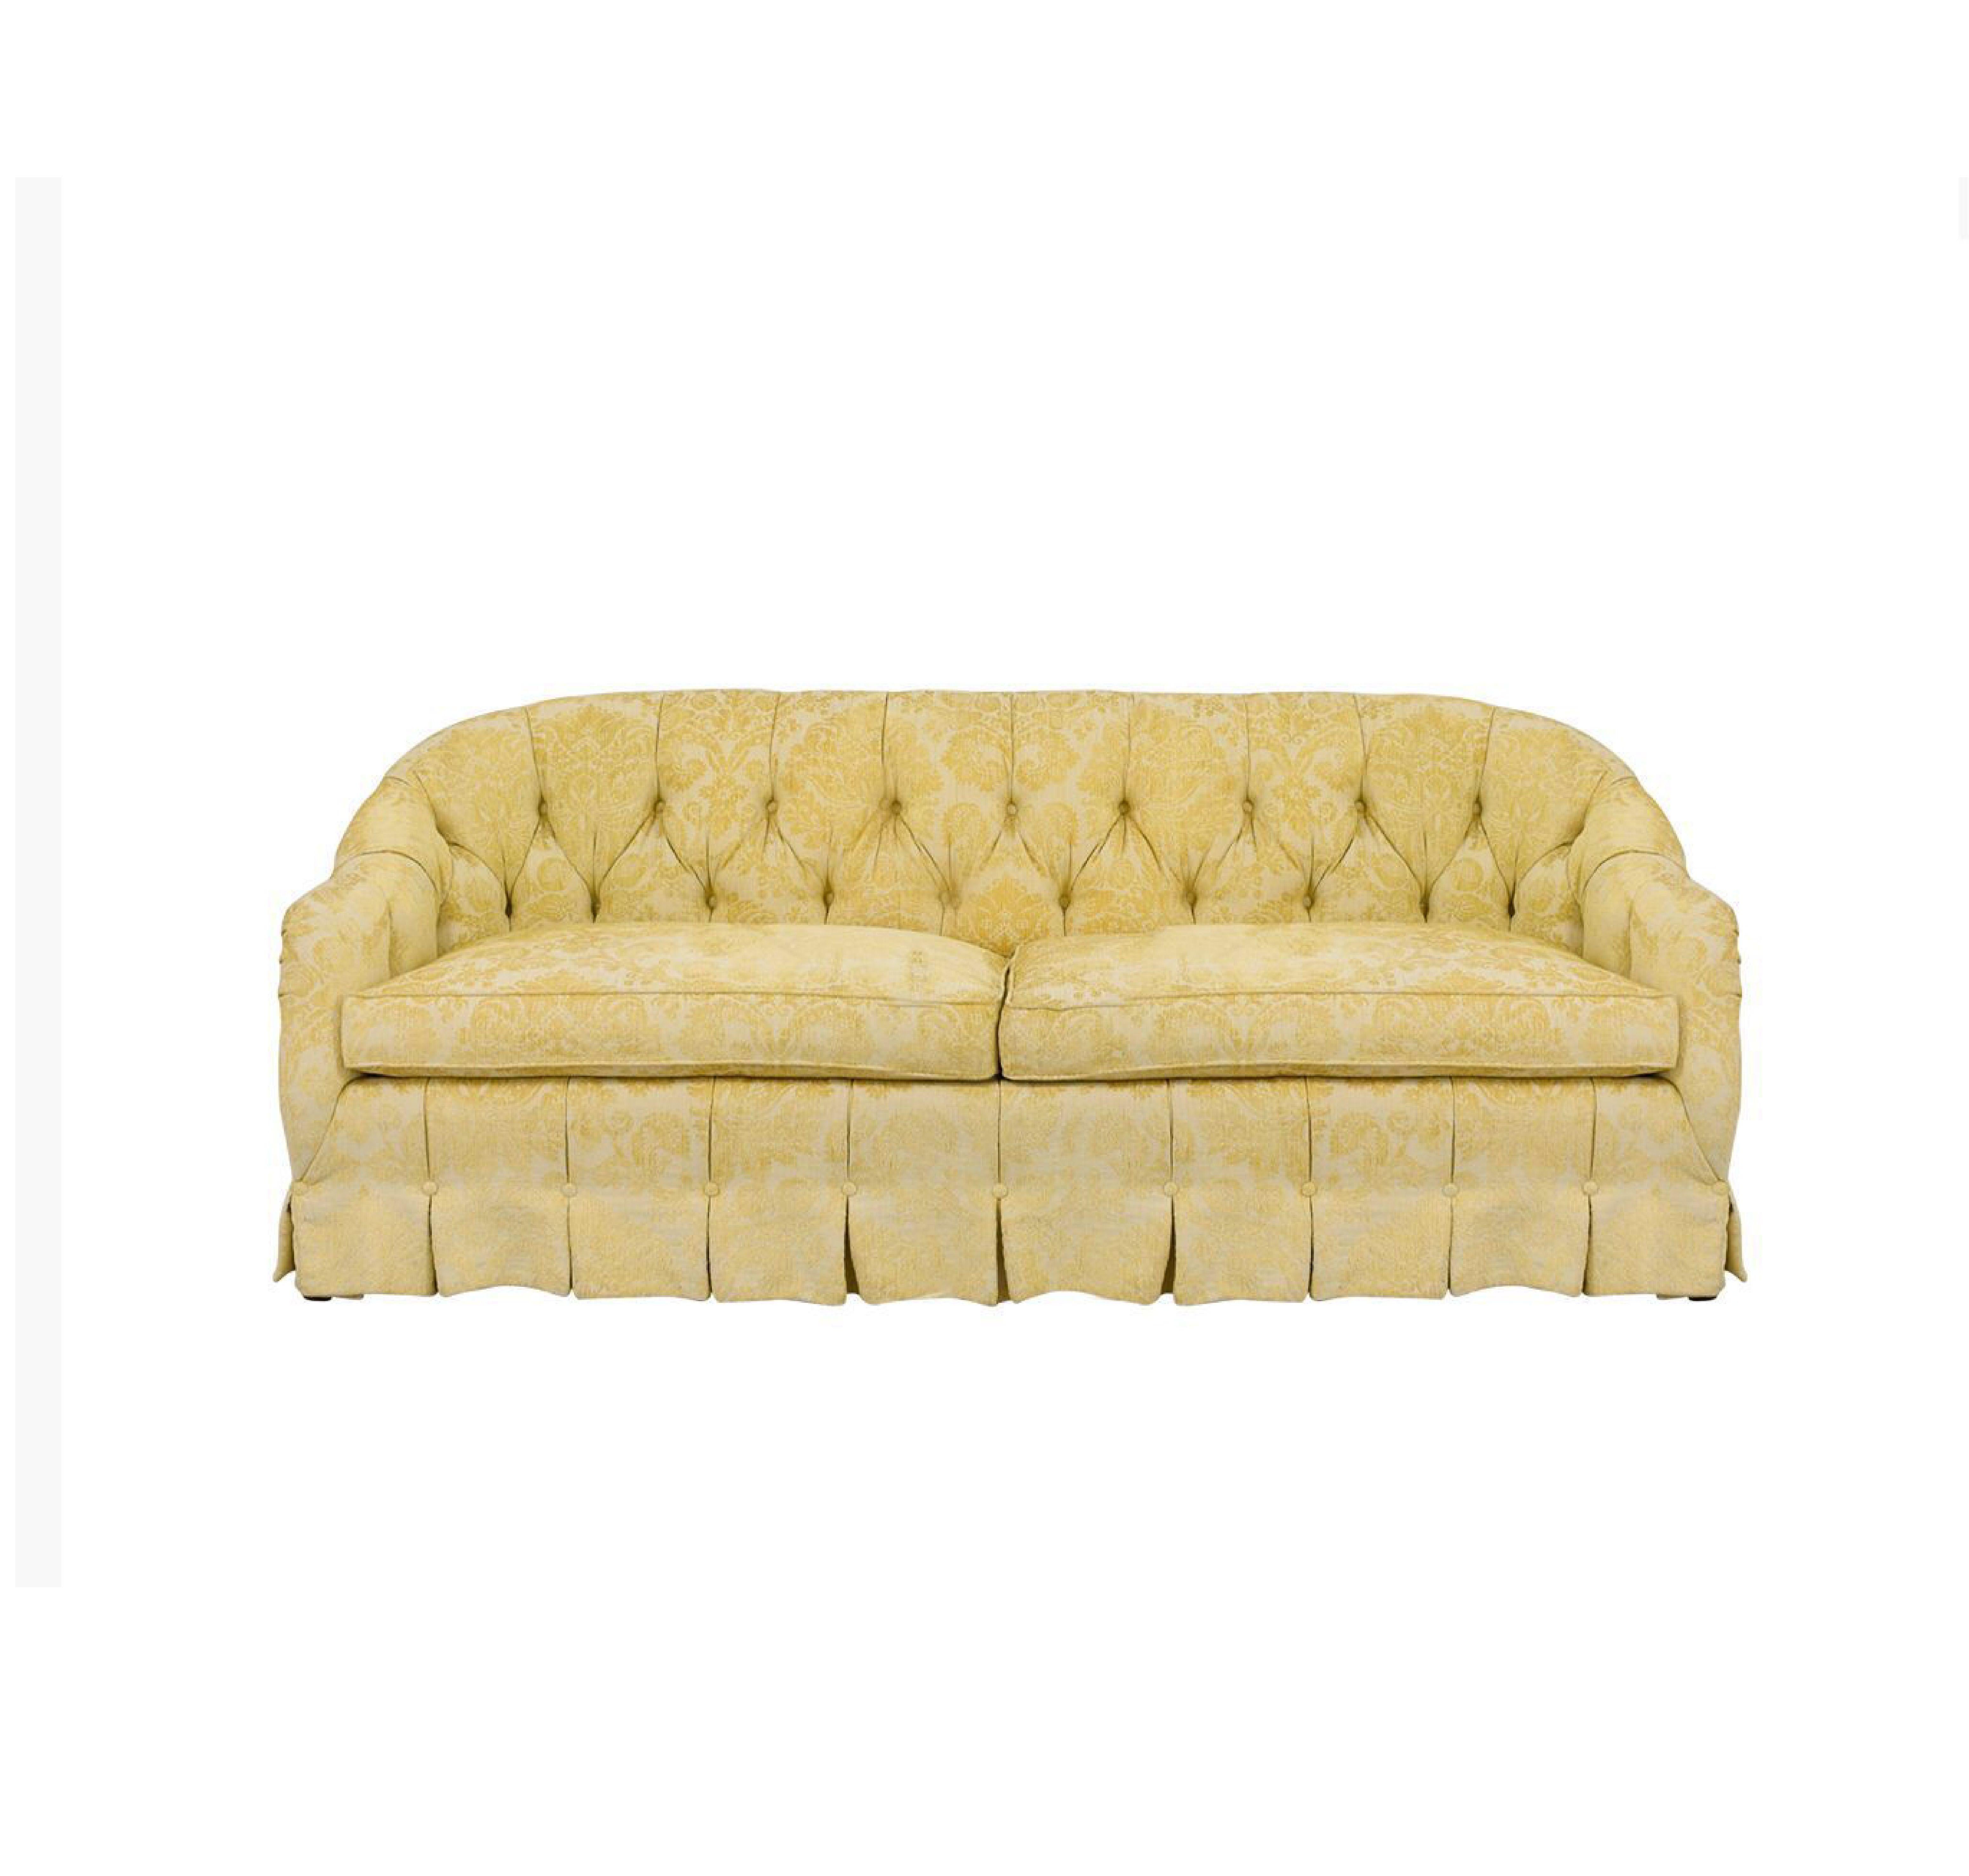 Gorgeous and meticulously crafted sofa by Ashley Manor Inc., a boutique high-end furniture maker out of North Carolina that was in business between 1970-2007. Ashley Manor Inc is not to be confused with Ashley Manor (UK) and Ashley Furniture. This